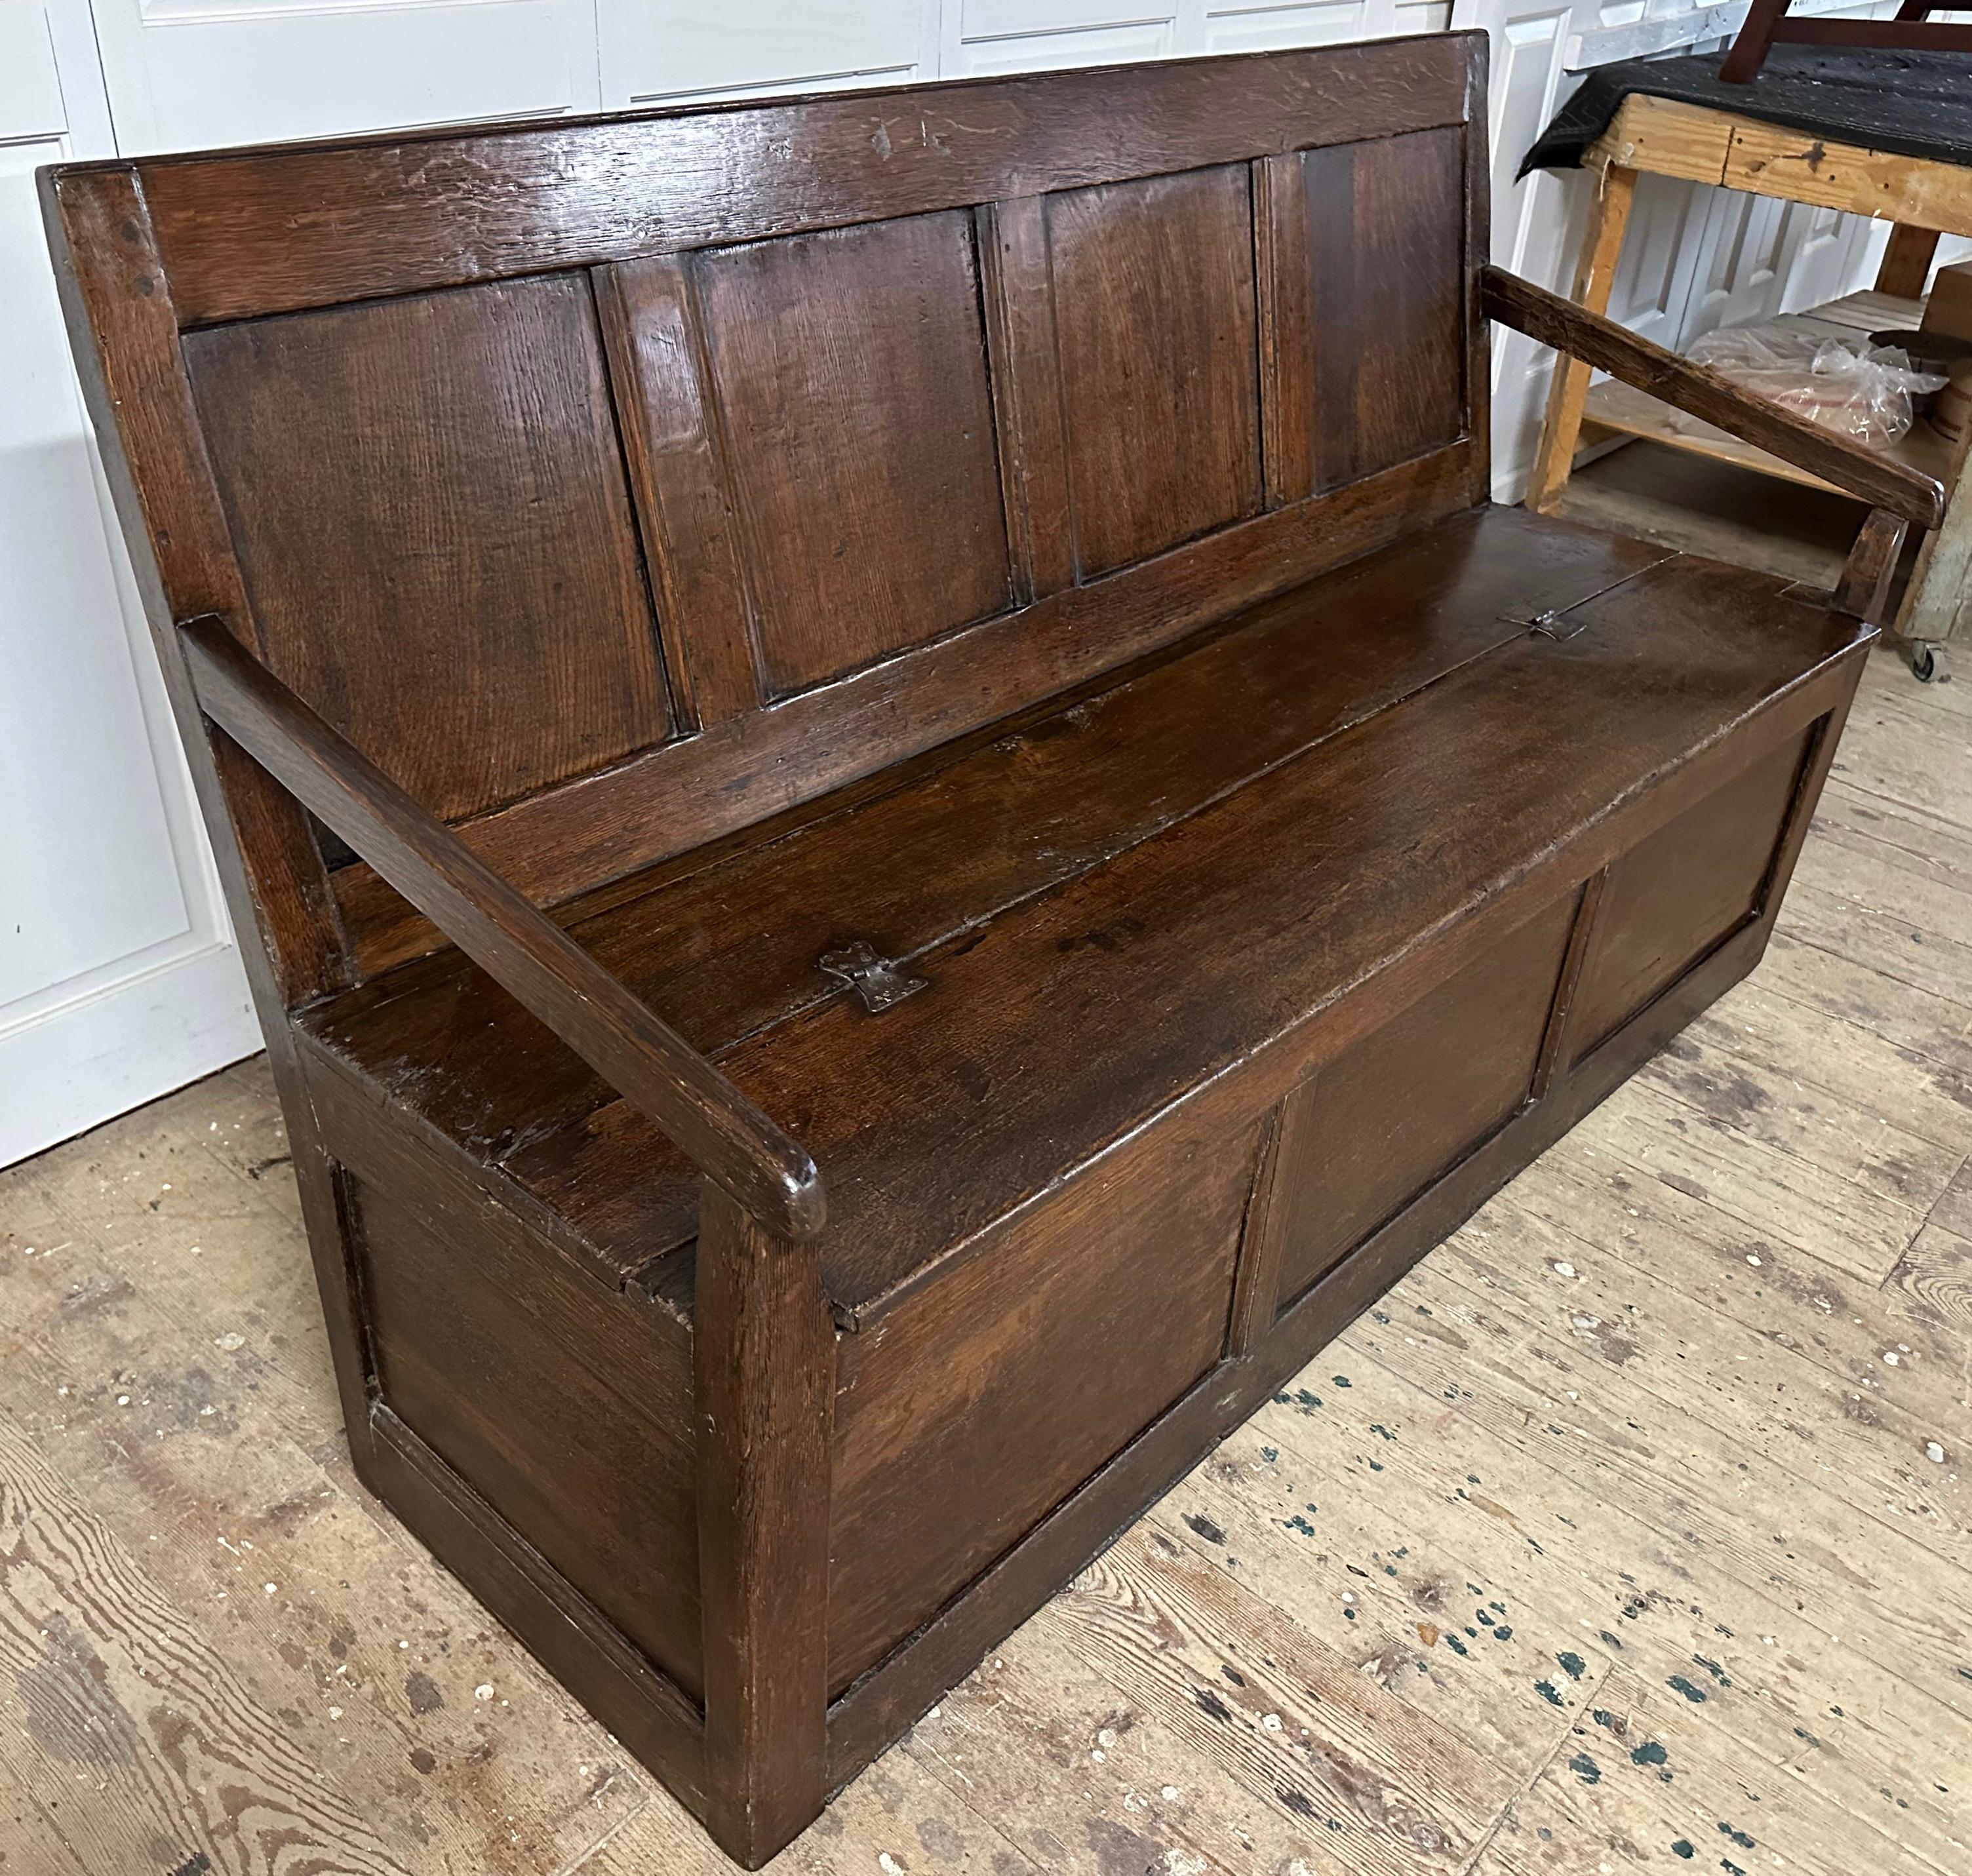 19th Century Antique Jacobean Style Oak Hall Bench For Sale